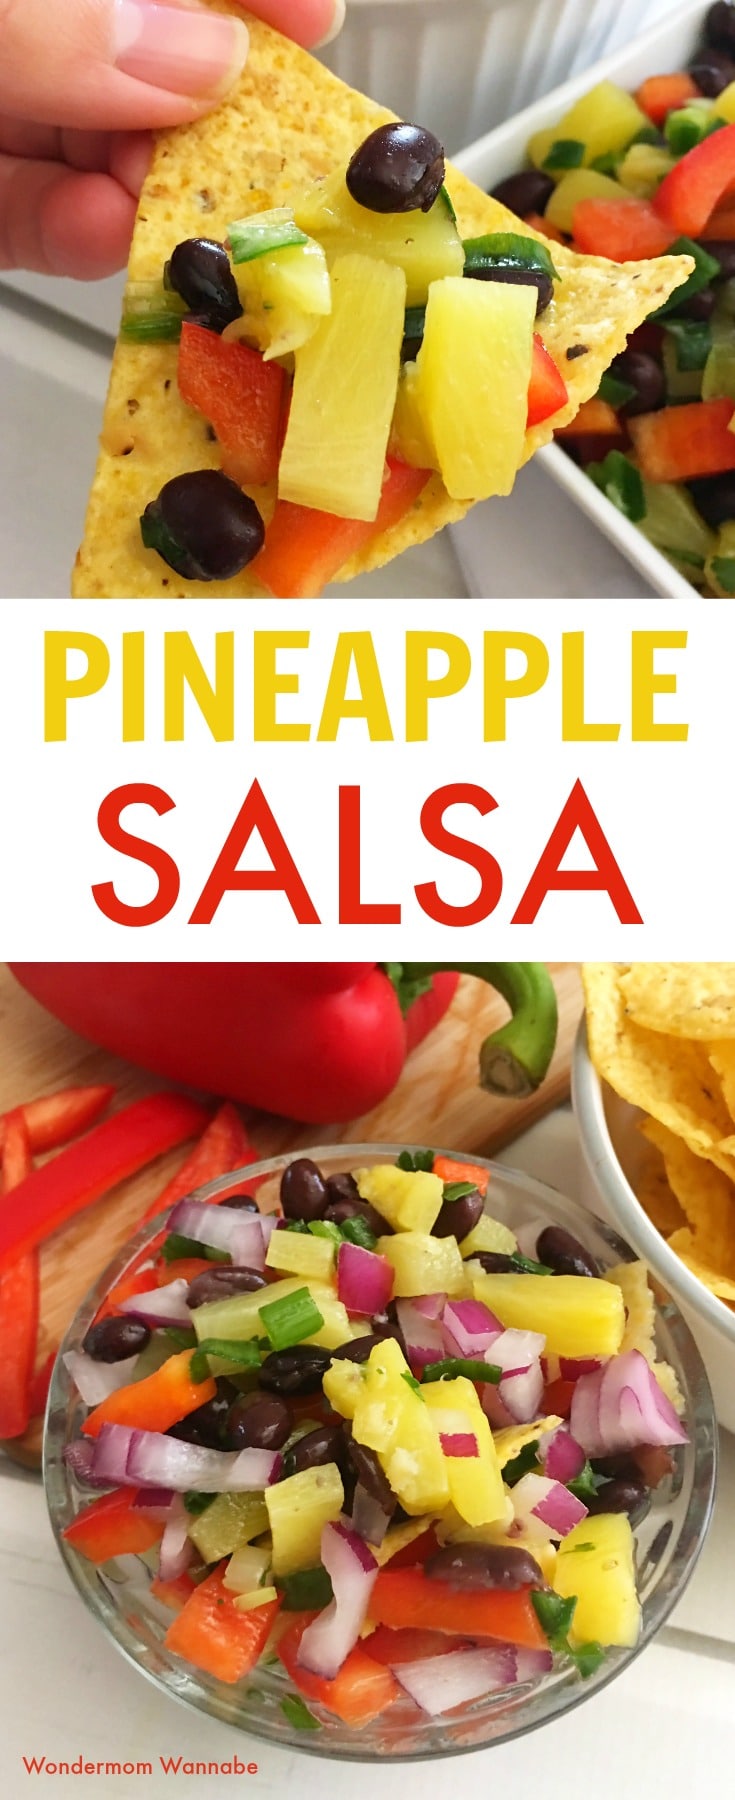 This pineapple salsa is such a pretty and delicious appetizer and it only takes a few minutes to make! #pineapple #salsa #easyappetizer via @wondermomwannab